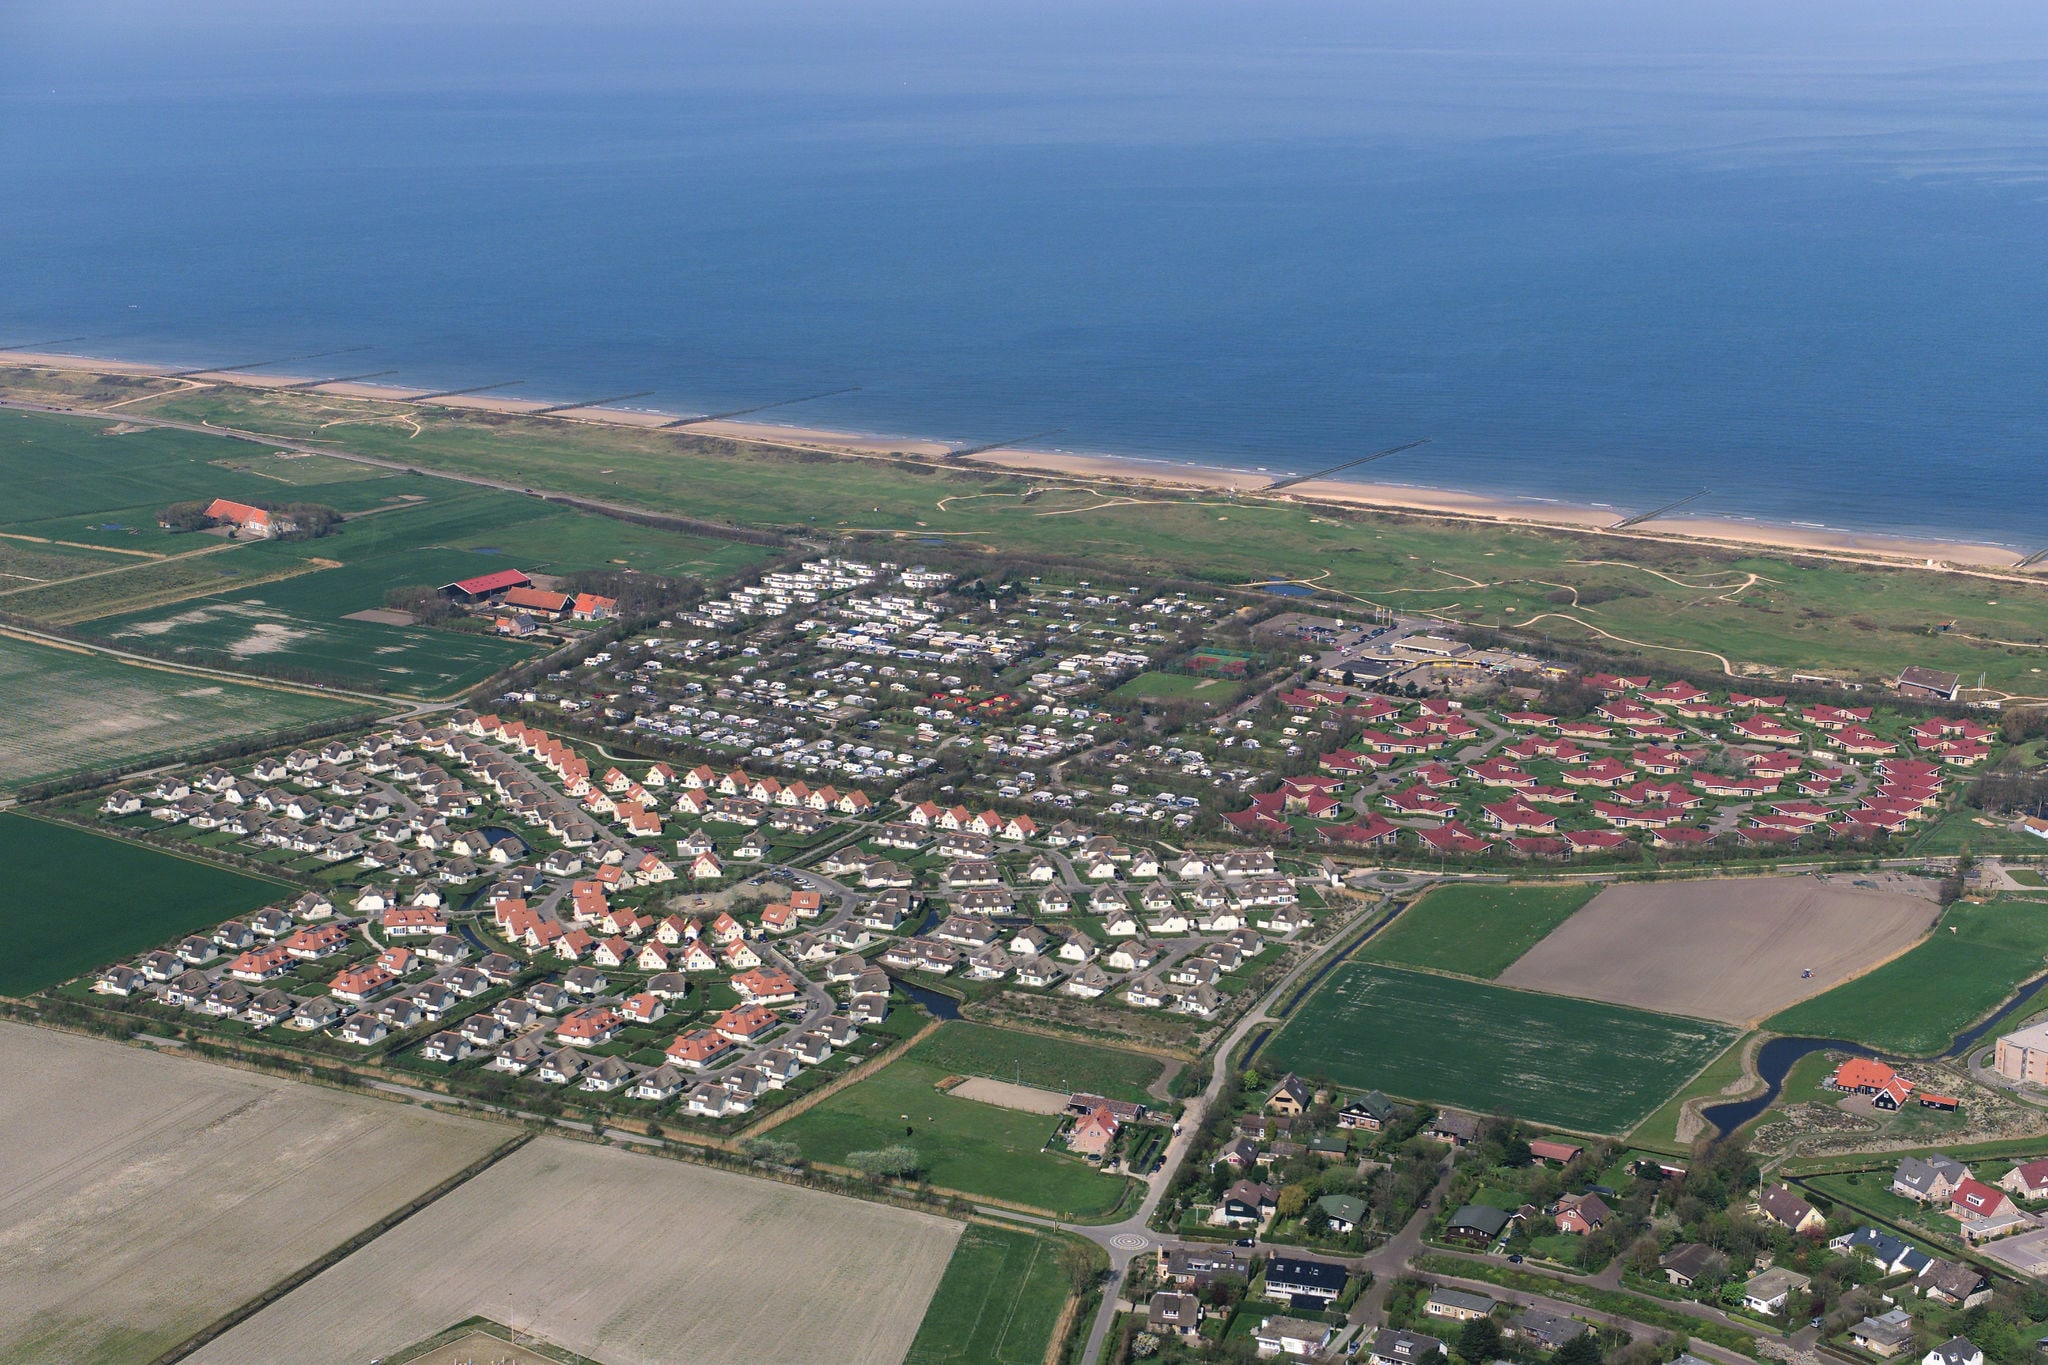 Detached villa with dishwasher, on a holiday park in Domburg, 1 km from the sea